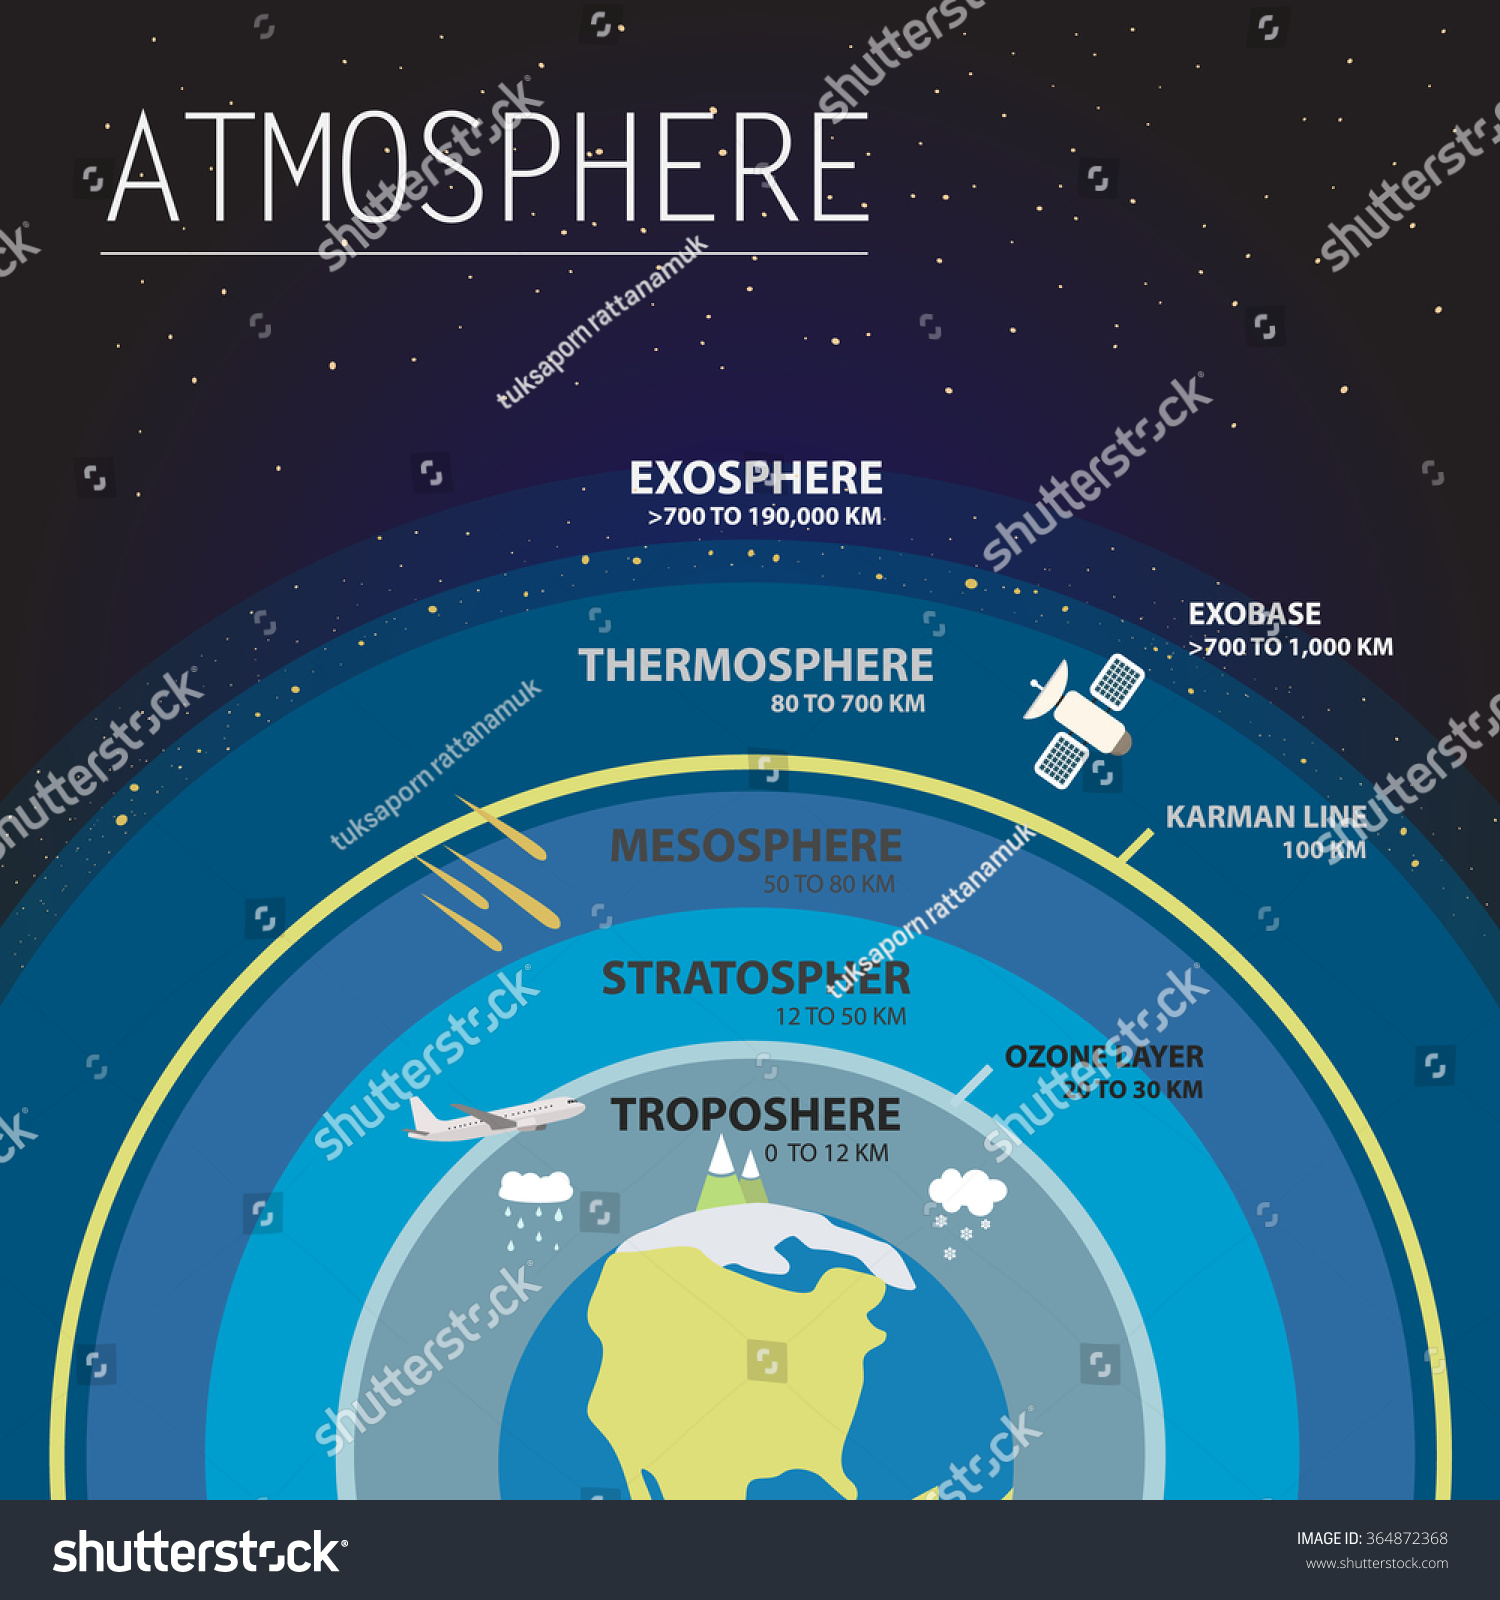 stock-vector-atmosphere-layers-infographic-vector-illustration-364872368.jpg